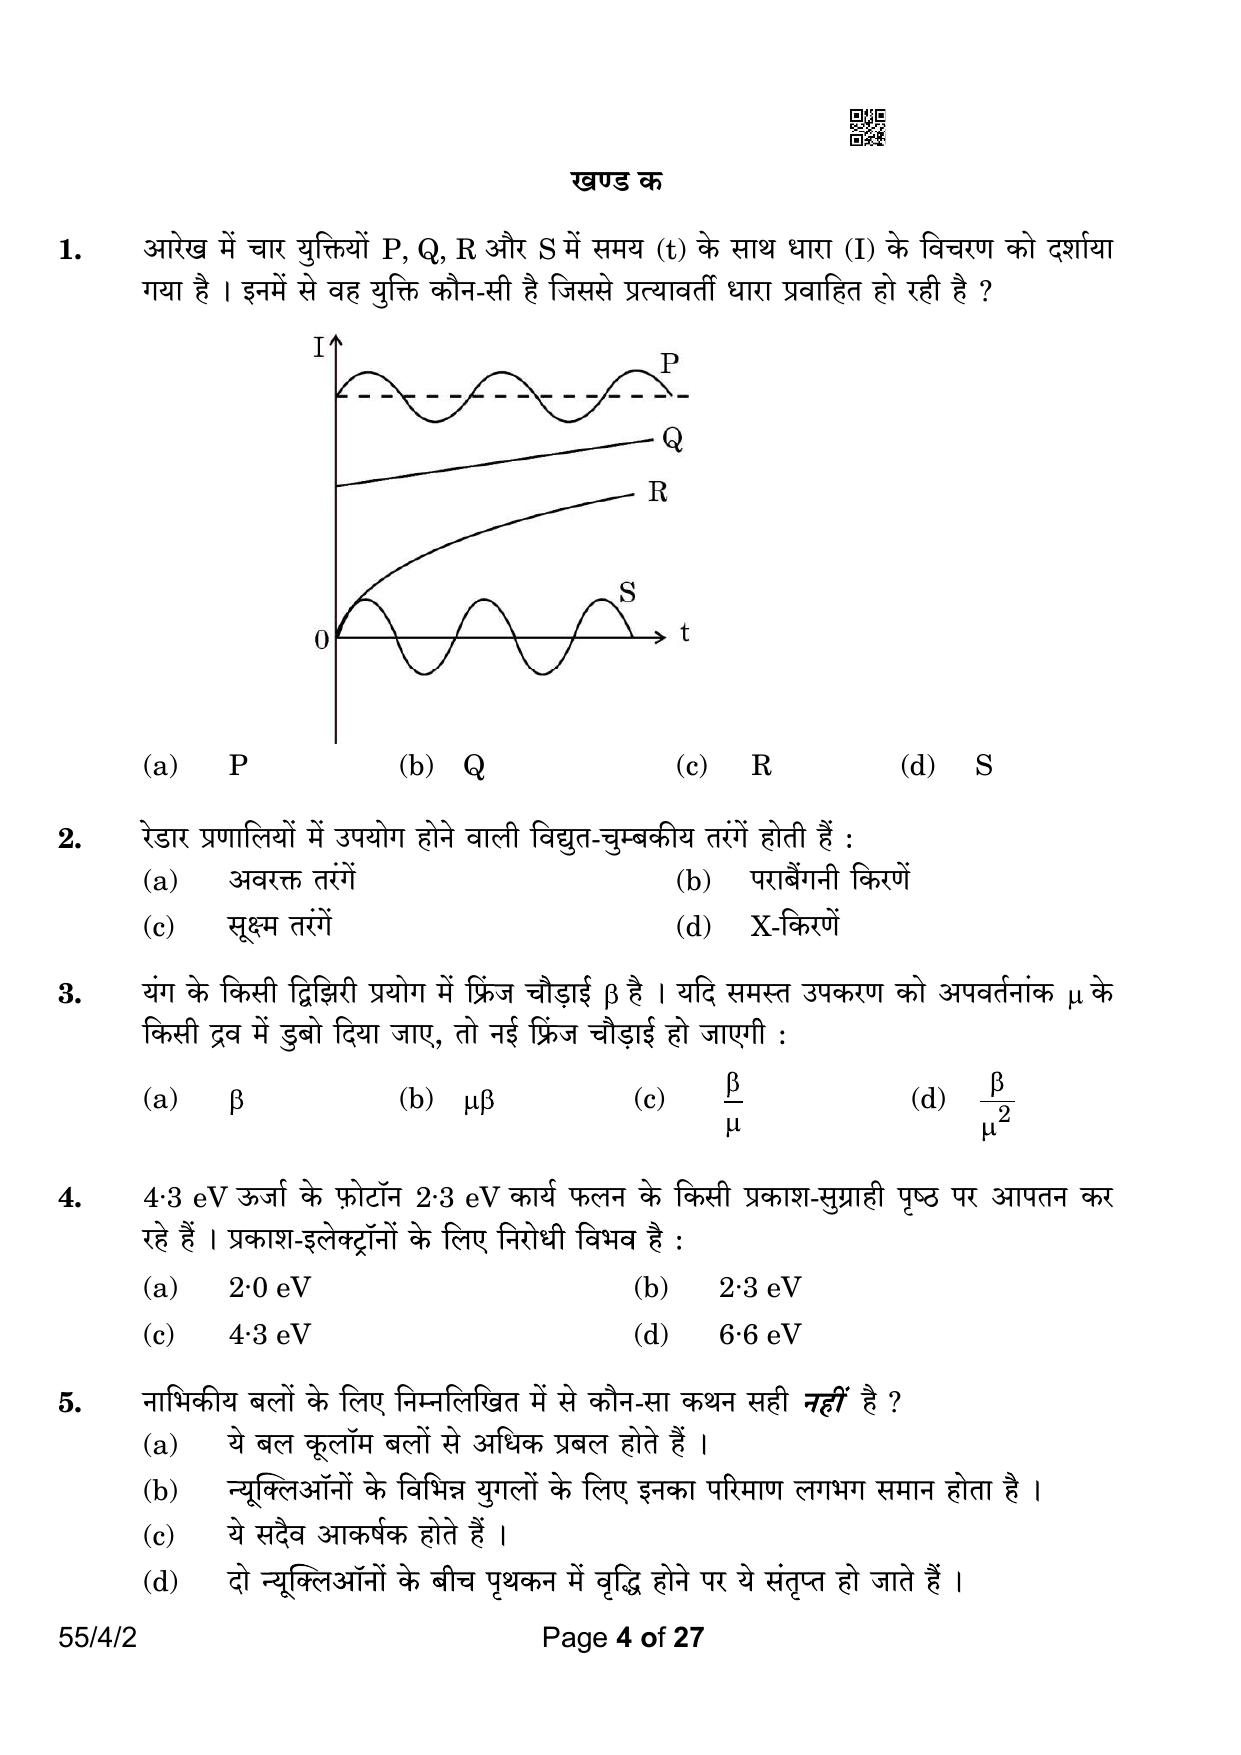 CBSE Class 12 55-4-2 Physics 2023 Question Paper - Page 4